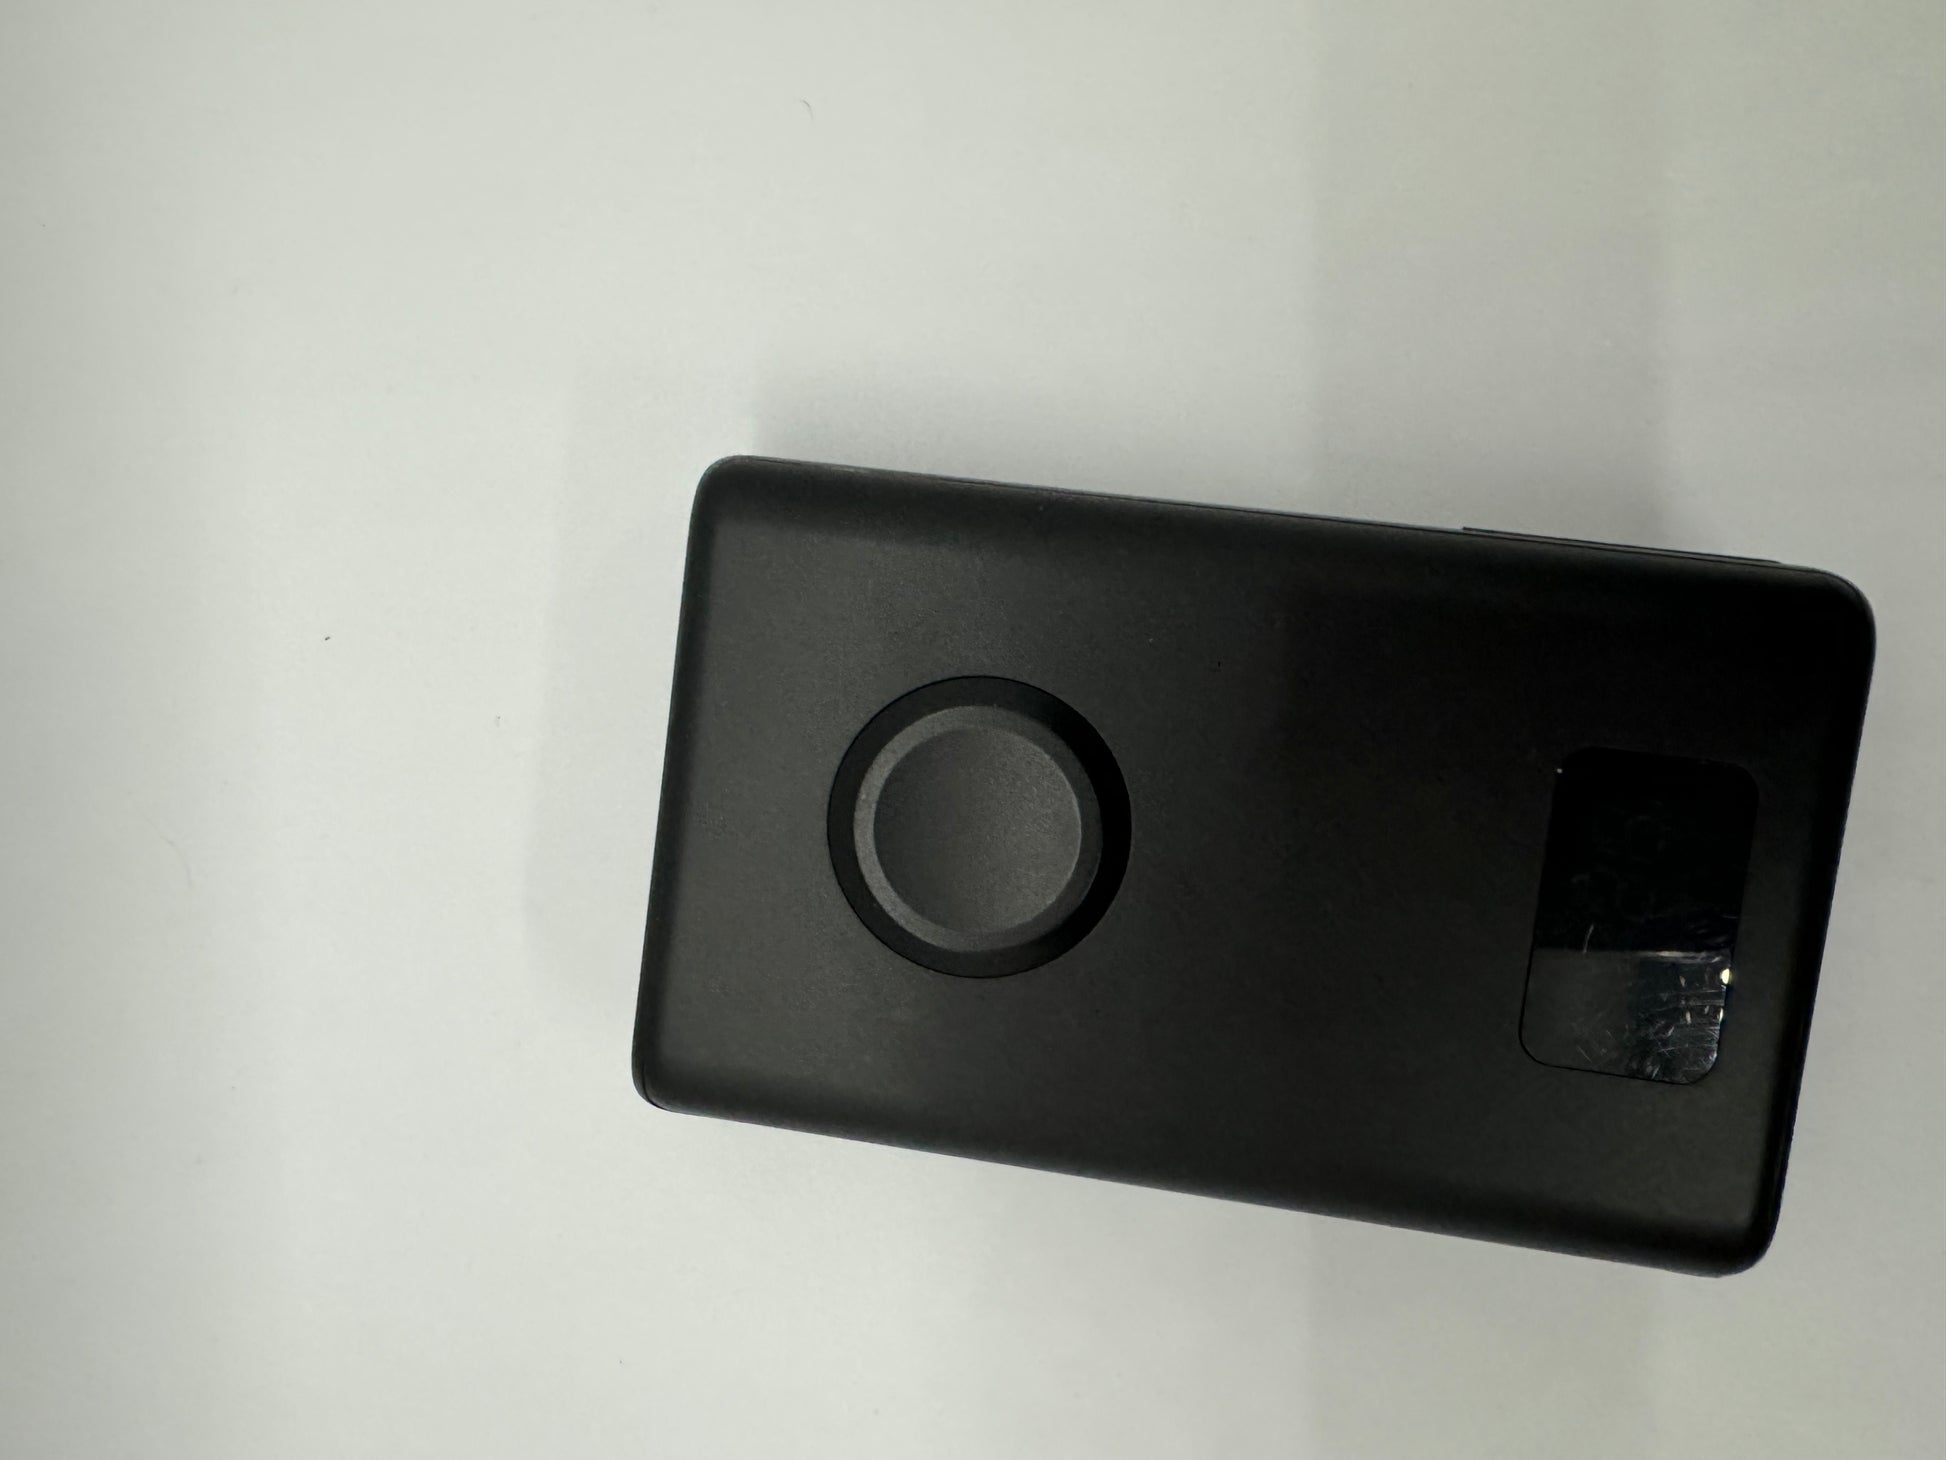 The picture shows a black rectangular object with rounded corners on a white background. The object is positioned in the bottom right corner of the image. On the object, there is a circular indentation or button near the center, and a small square cut-out on the right side. The square cut-out seems to have something reflective or metallic inside. The surface of the object appears to be smooth and matte.